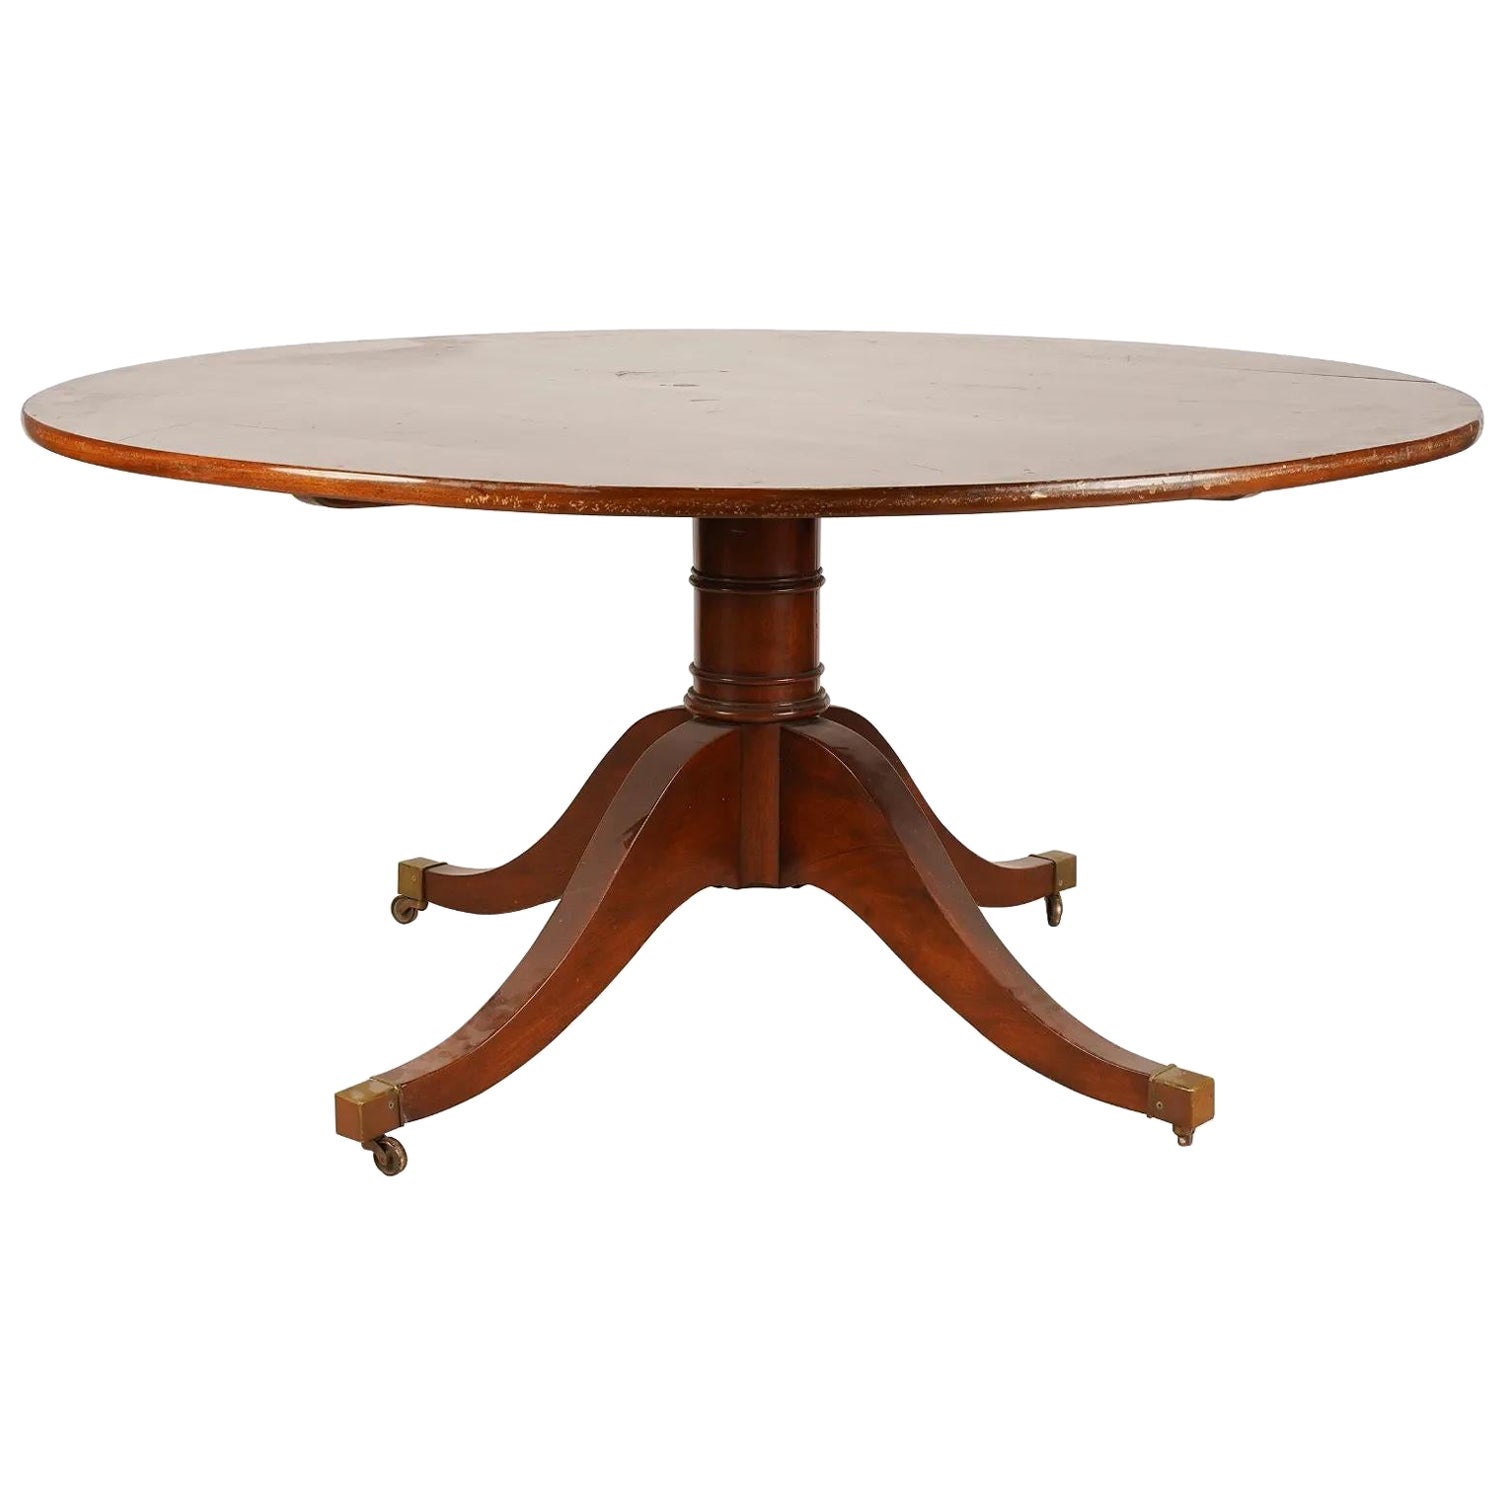 Antique English Regency 60" Round Pedestal Mahogany Dining Table Circa 1900 For Sale